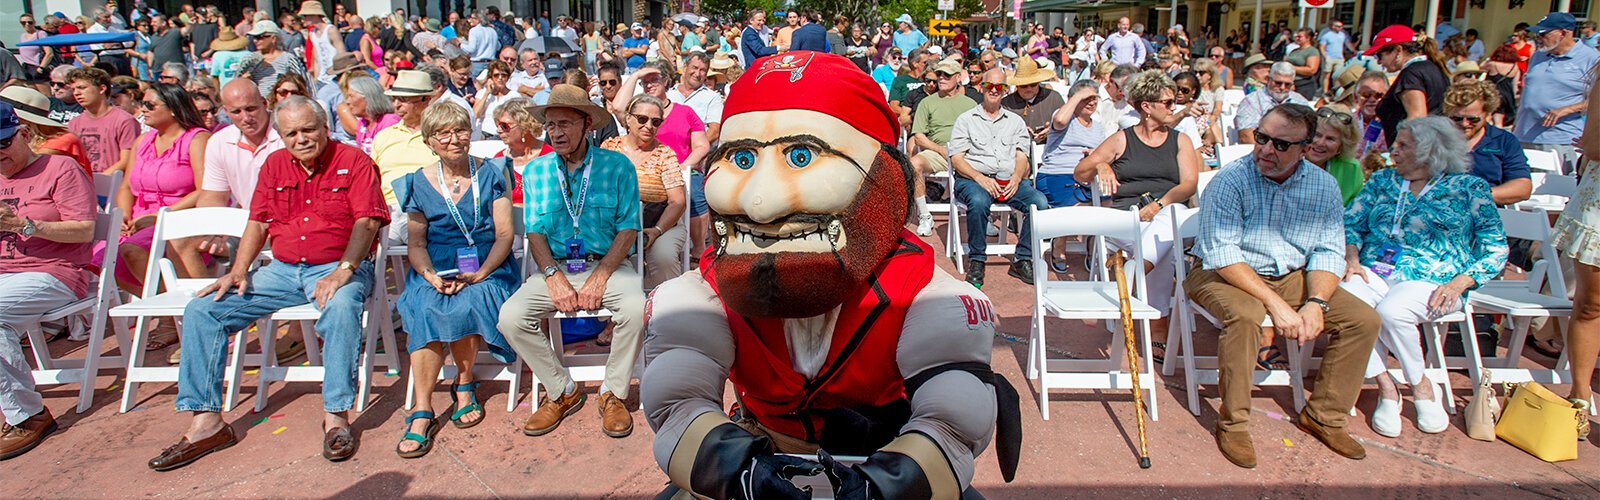 Tampa Bay Bucs mascot Captain Fear grabs a front-row seat for the ribbon cutting to open the rebuilt Coachman Park following the $84 million Imagine Clearwater improvement project.